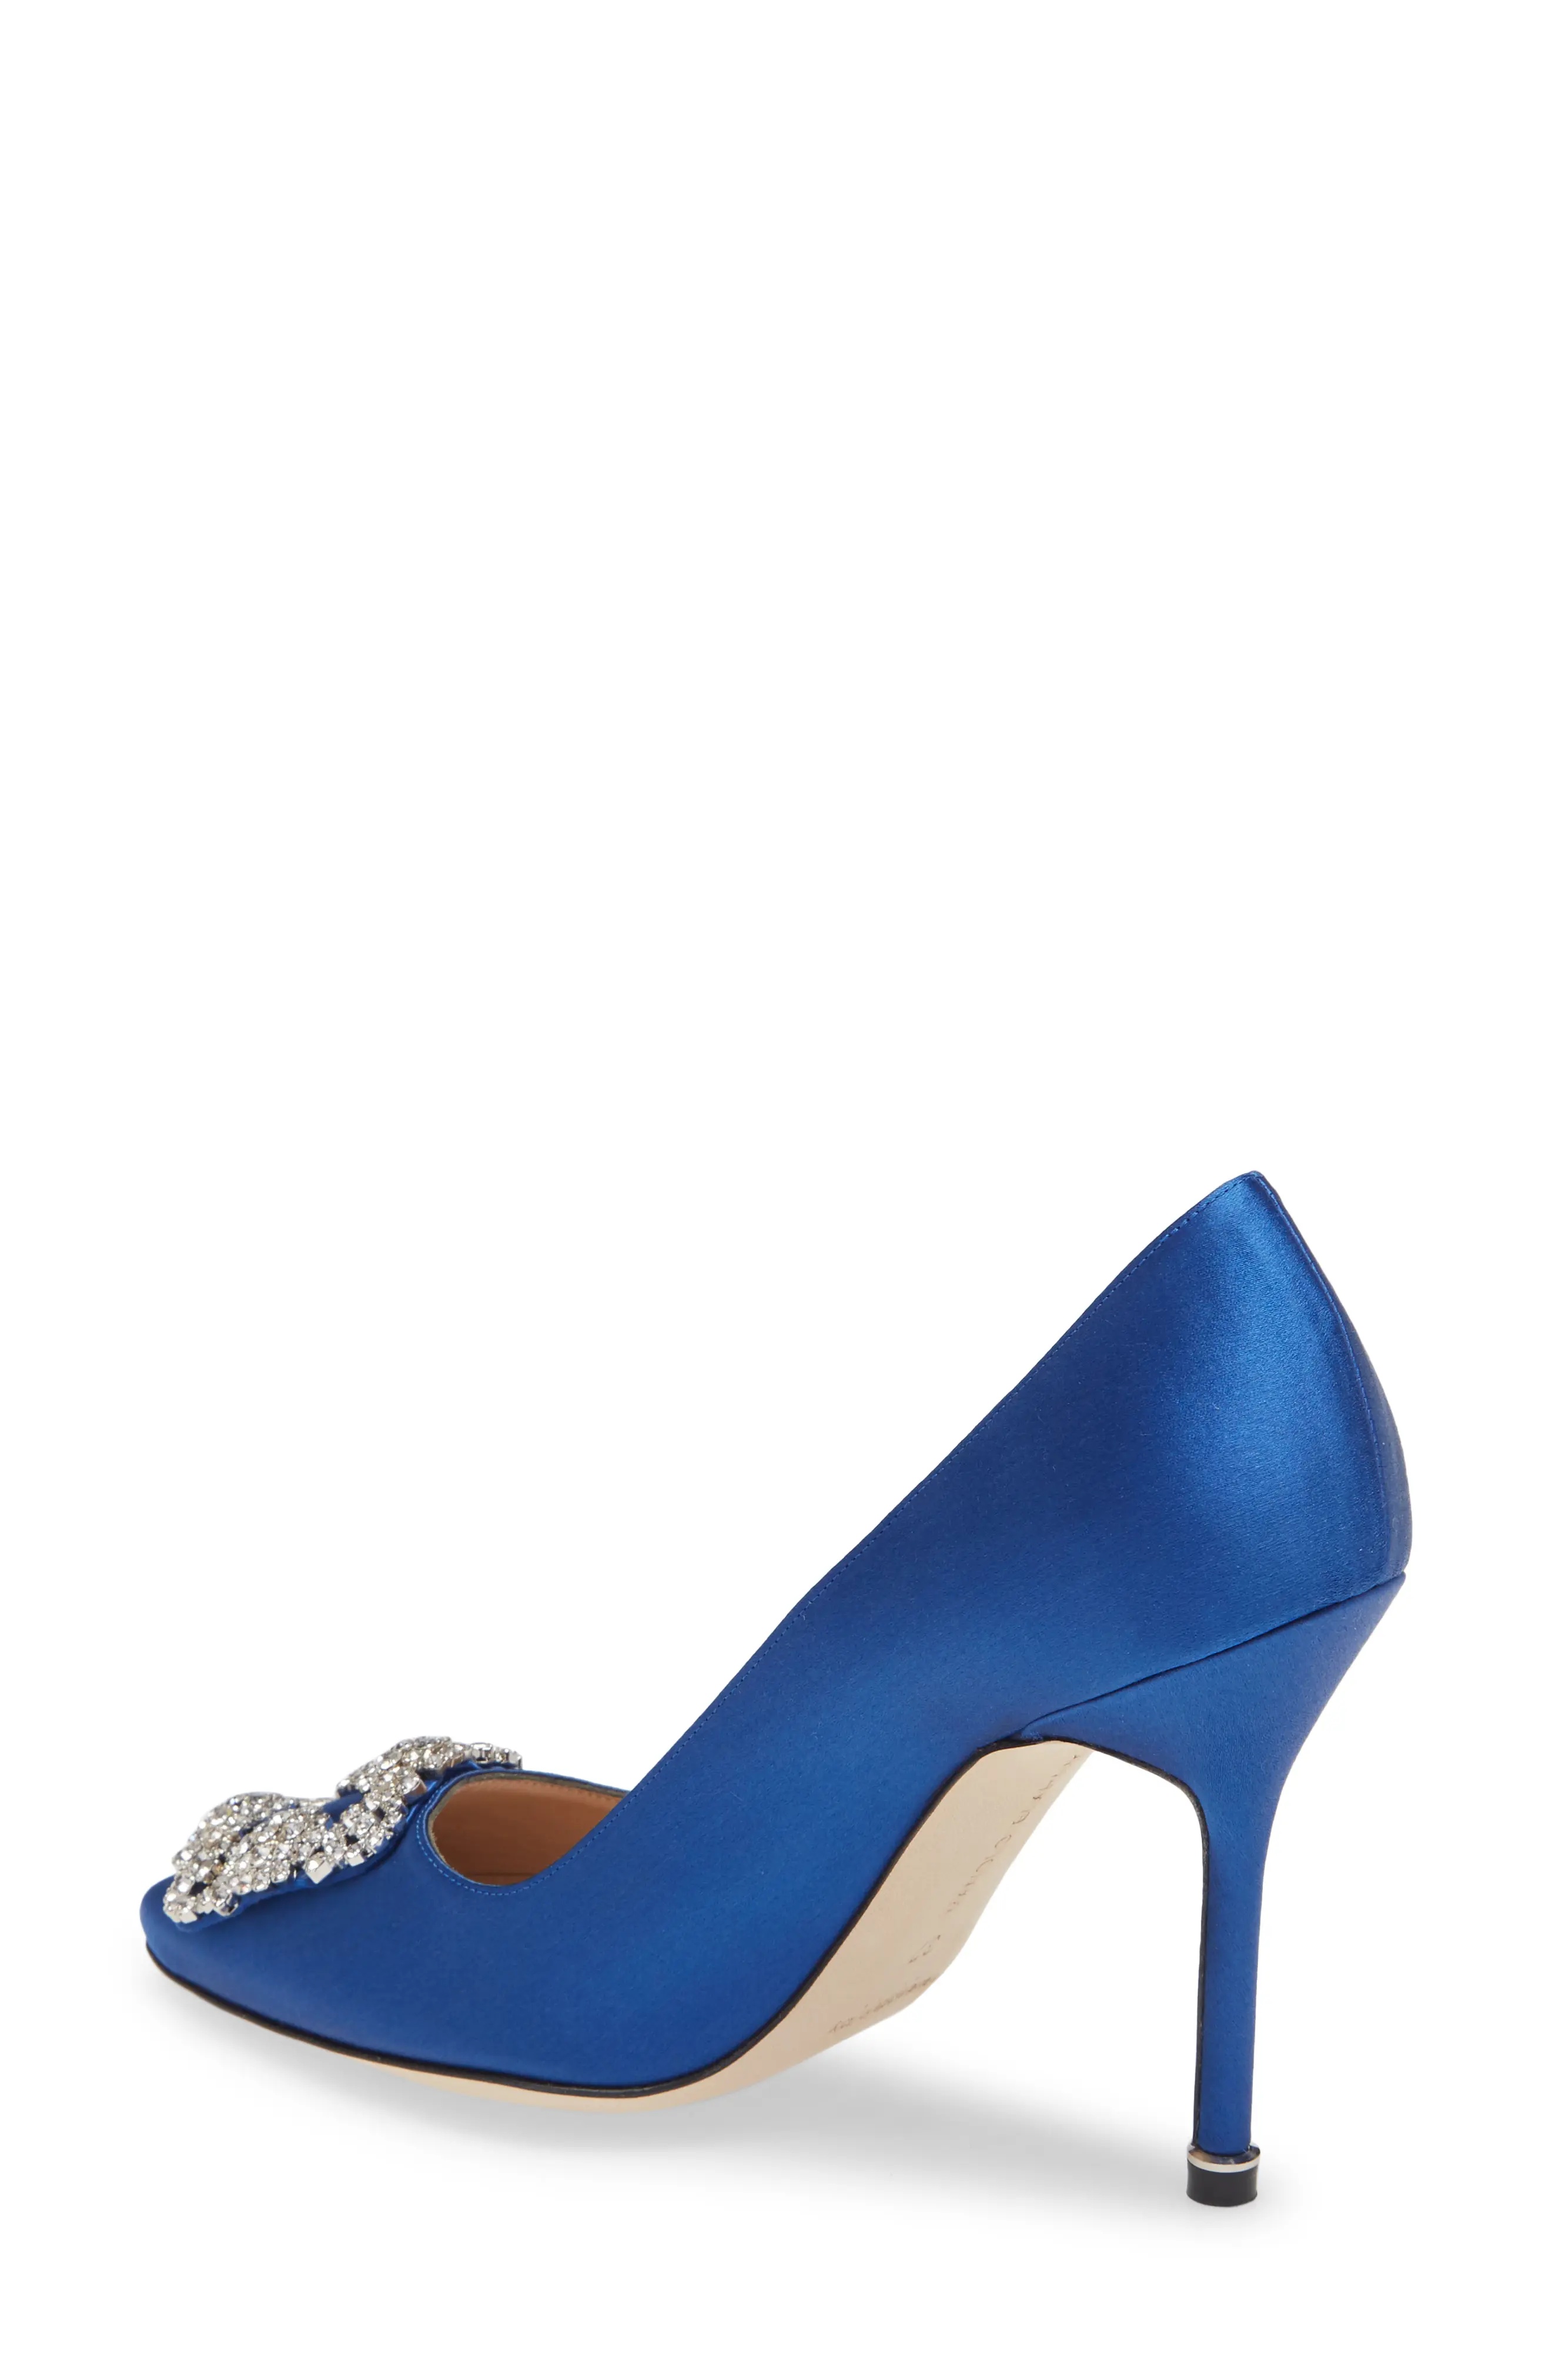 Hangisi Crystal Buckle Pump in Blue Satin Clear/Buckle - 2